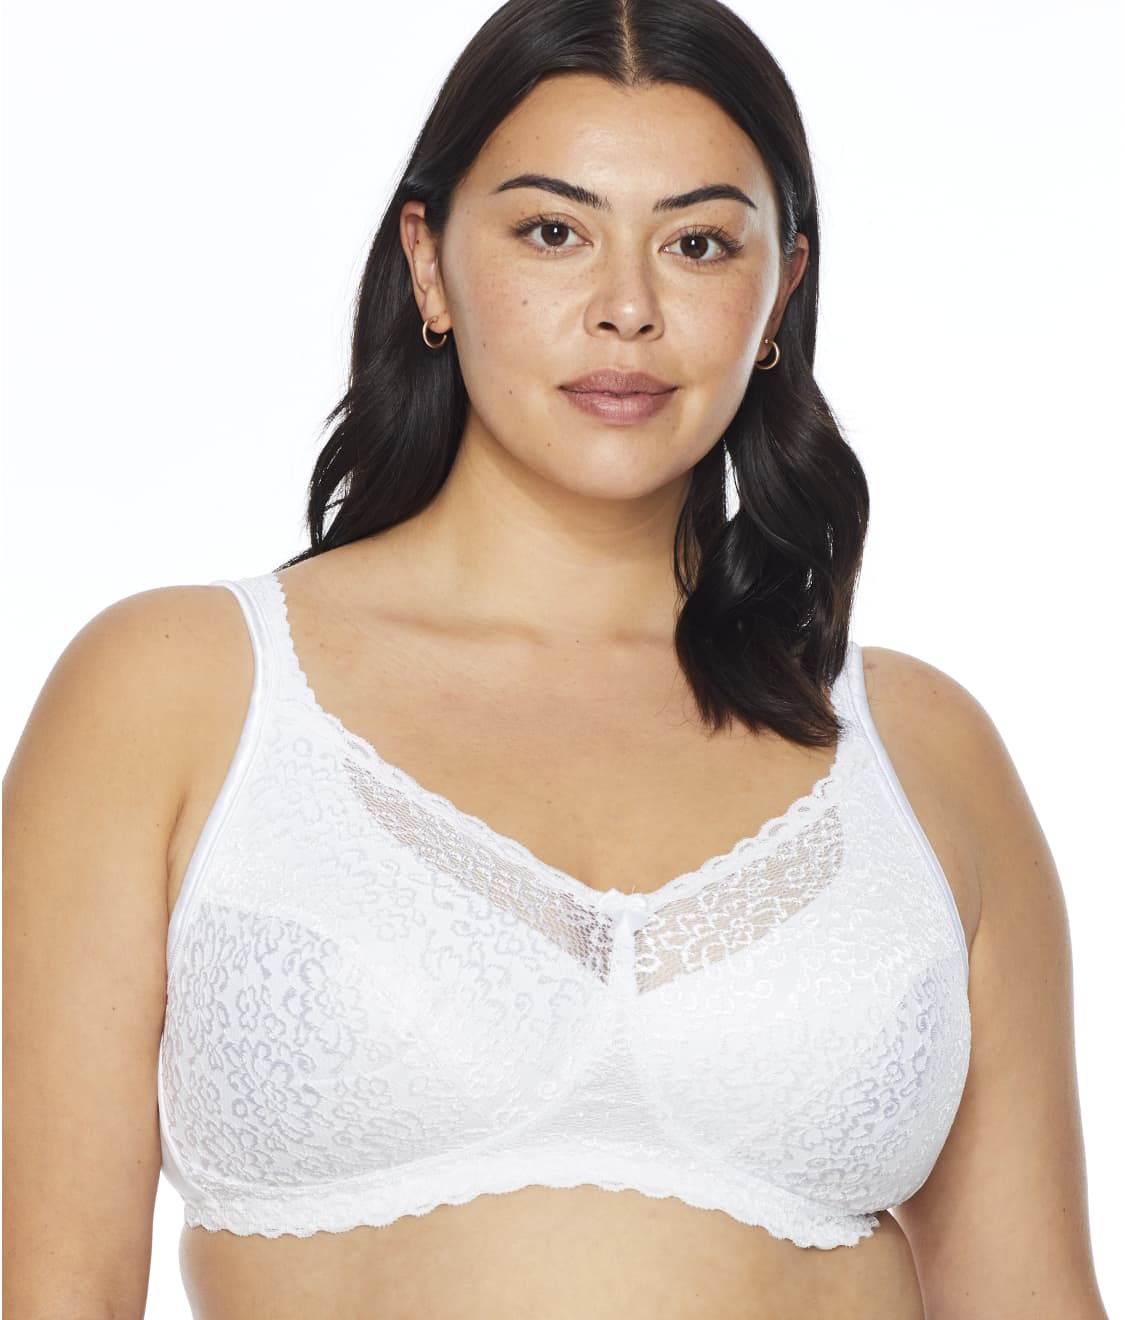 Playtex 18 Hour Breathable Comfort Lace Bra US4088, 56% OFF